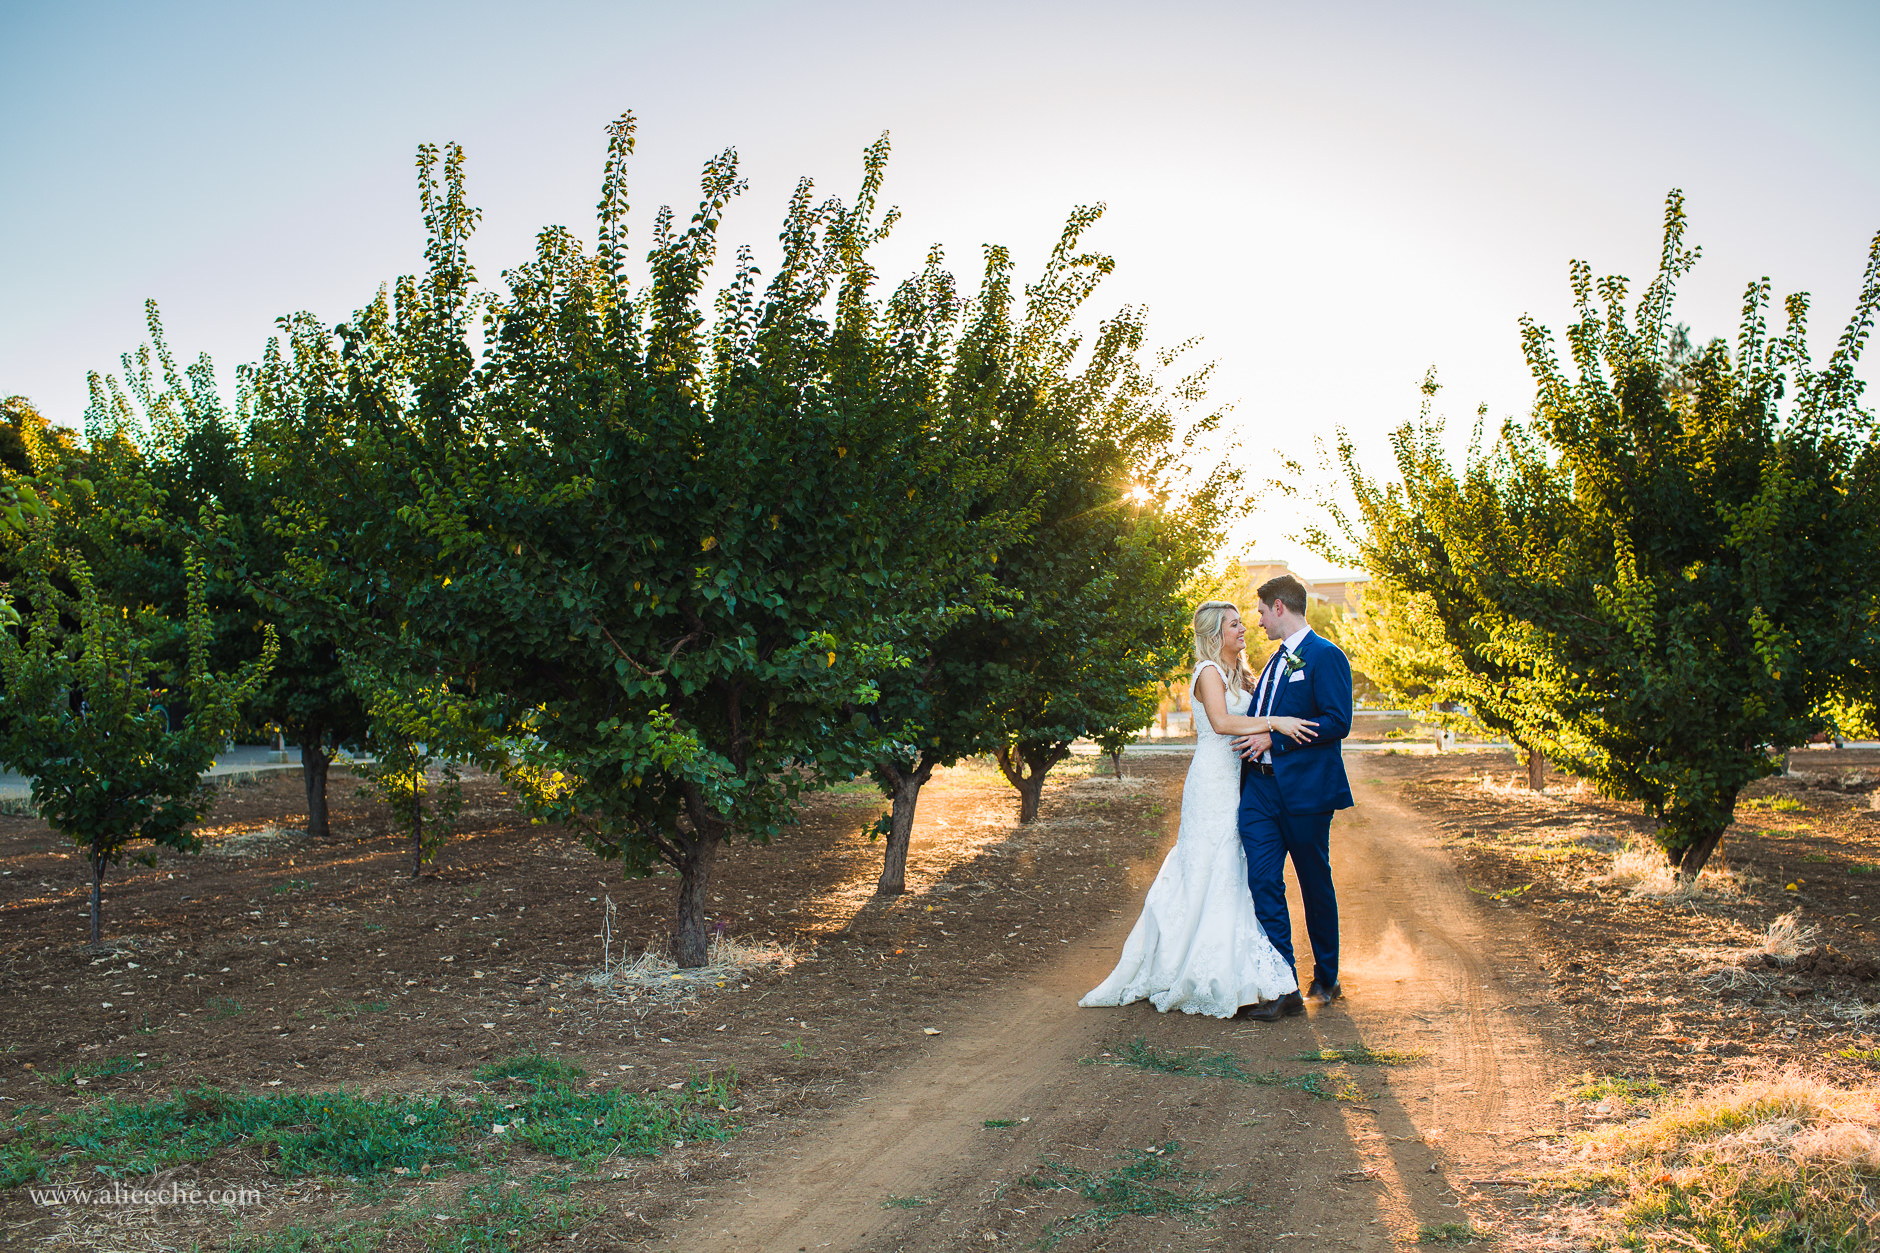 Los Altos History Museum Wedding Bride and Groom at Sunset in Orchard